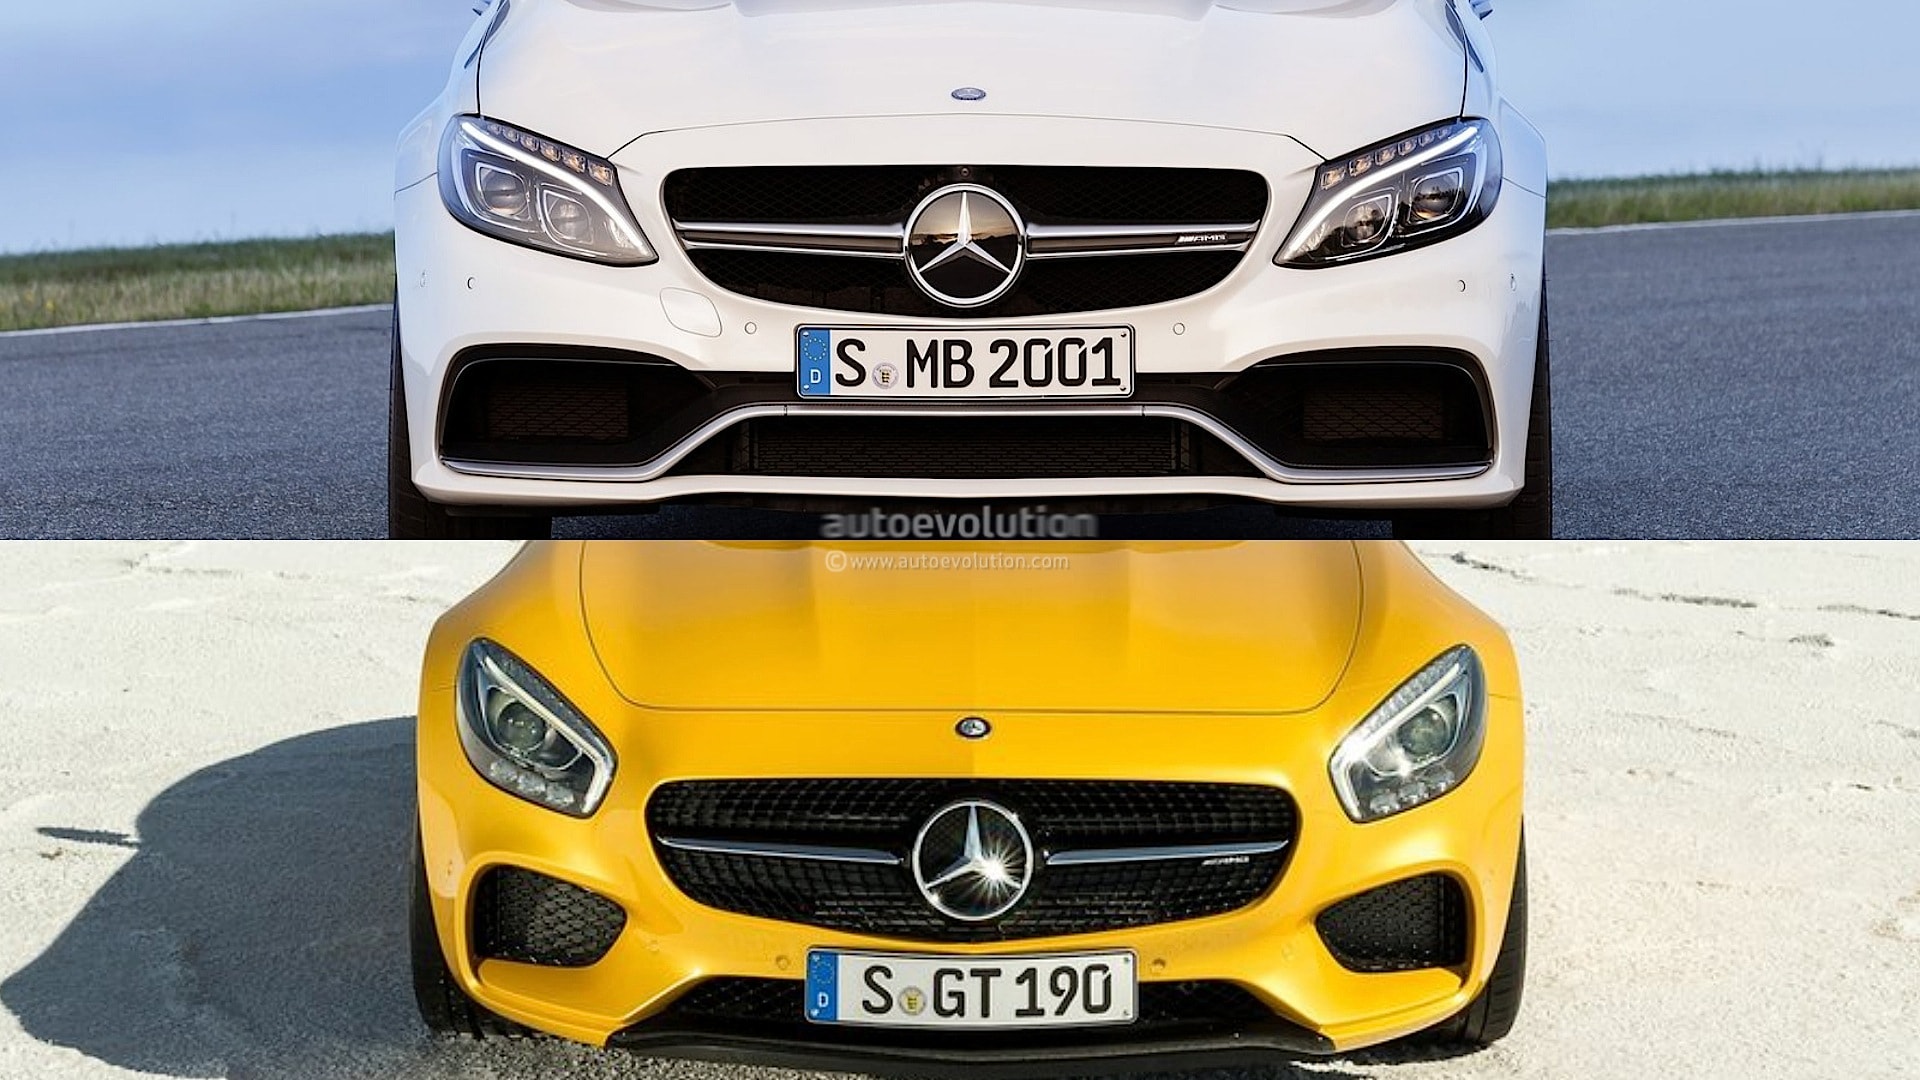 The difference between the Mercedes-AMG and Mercedes-Benz